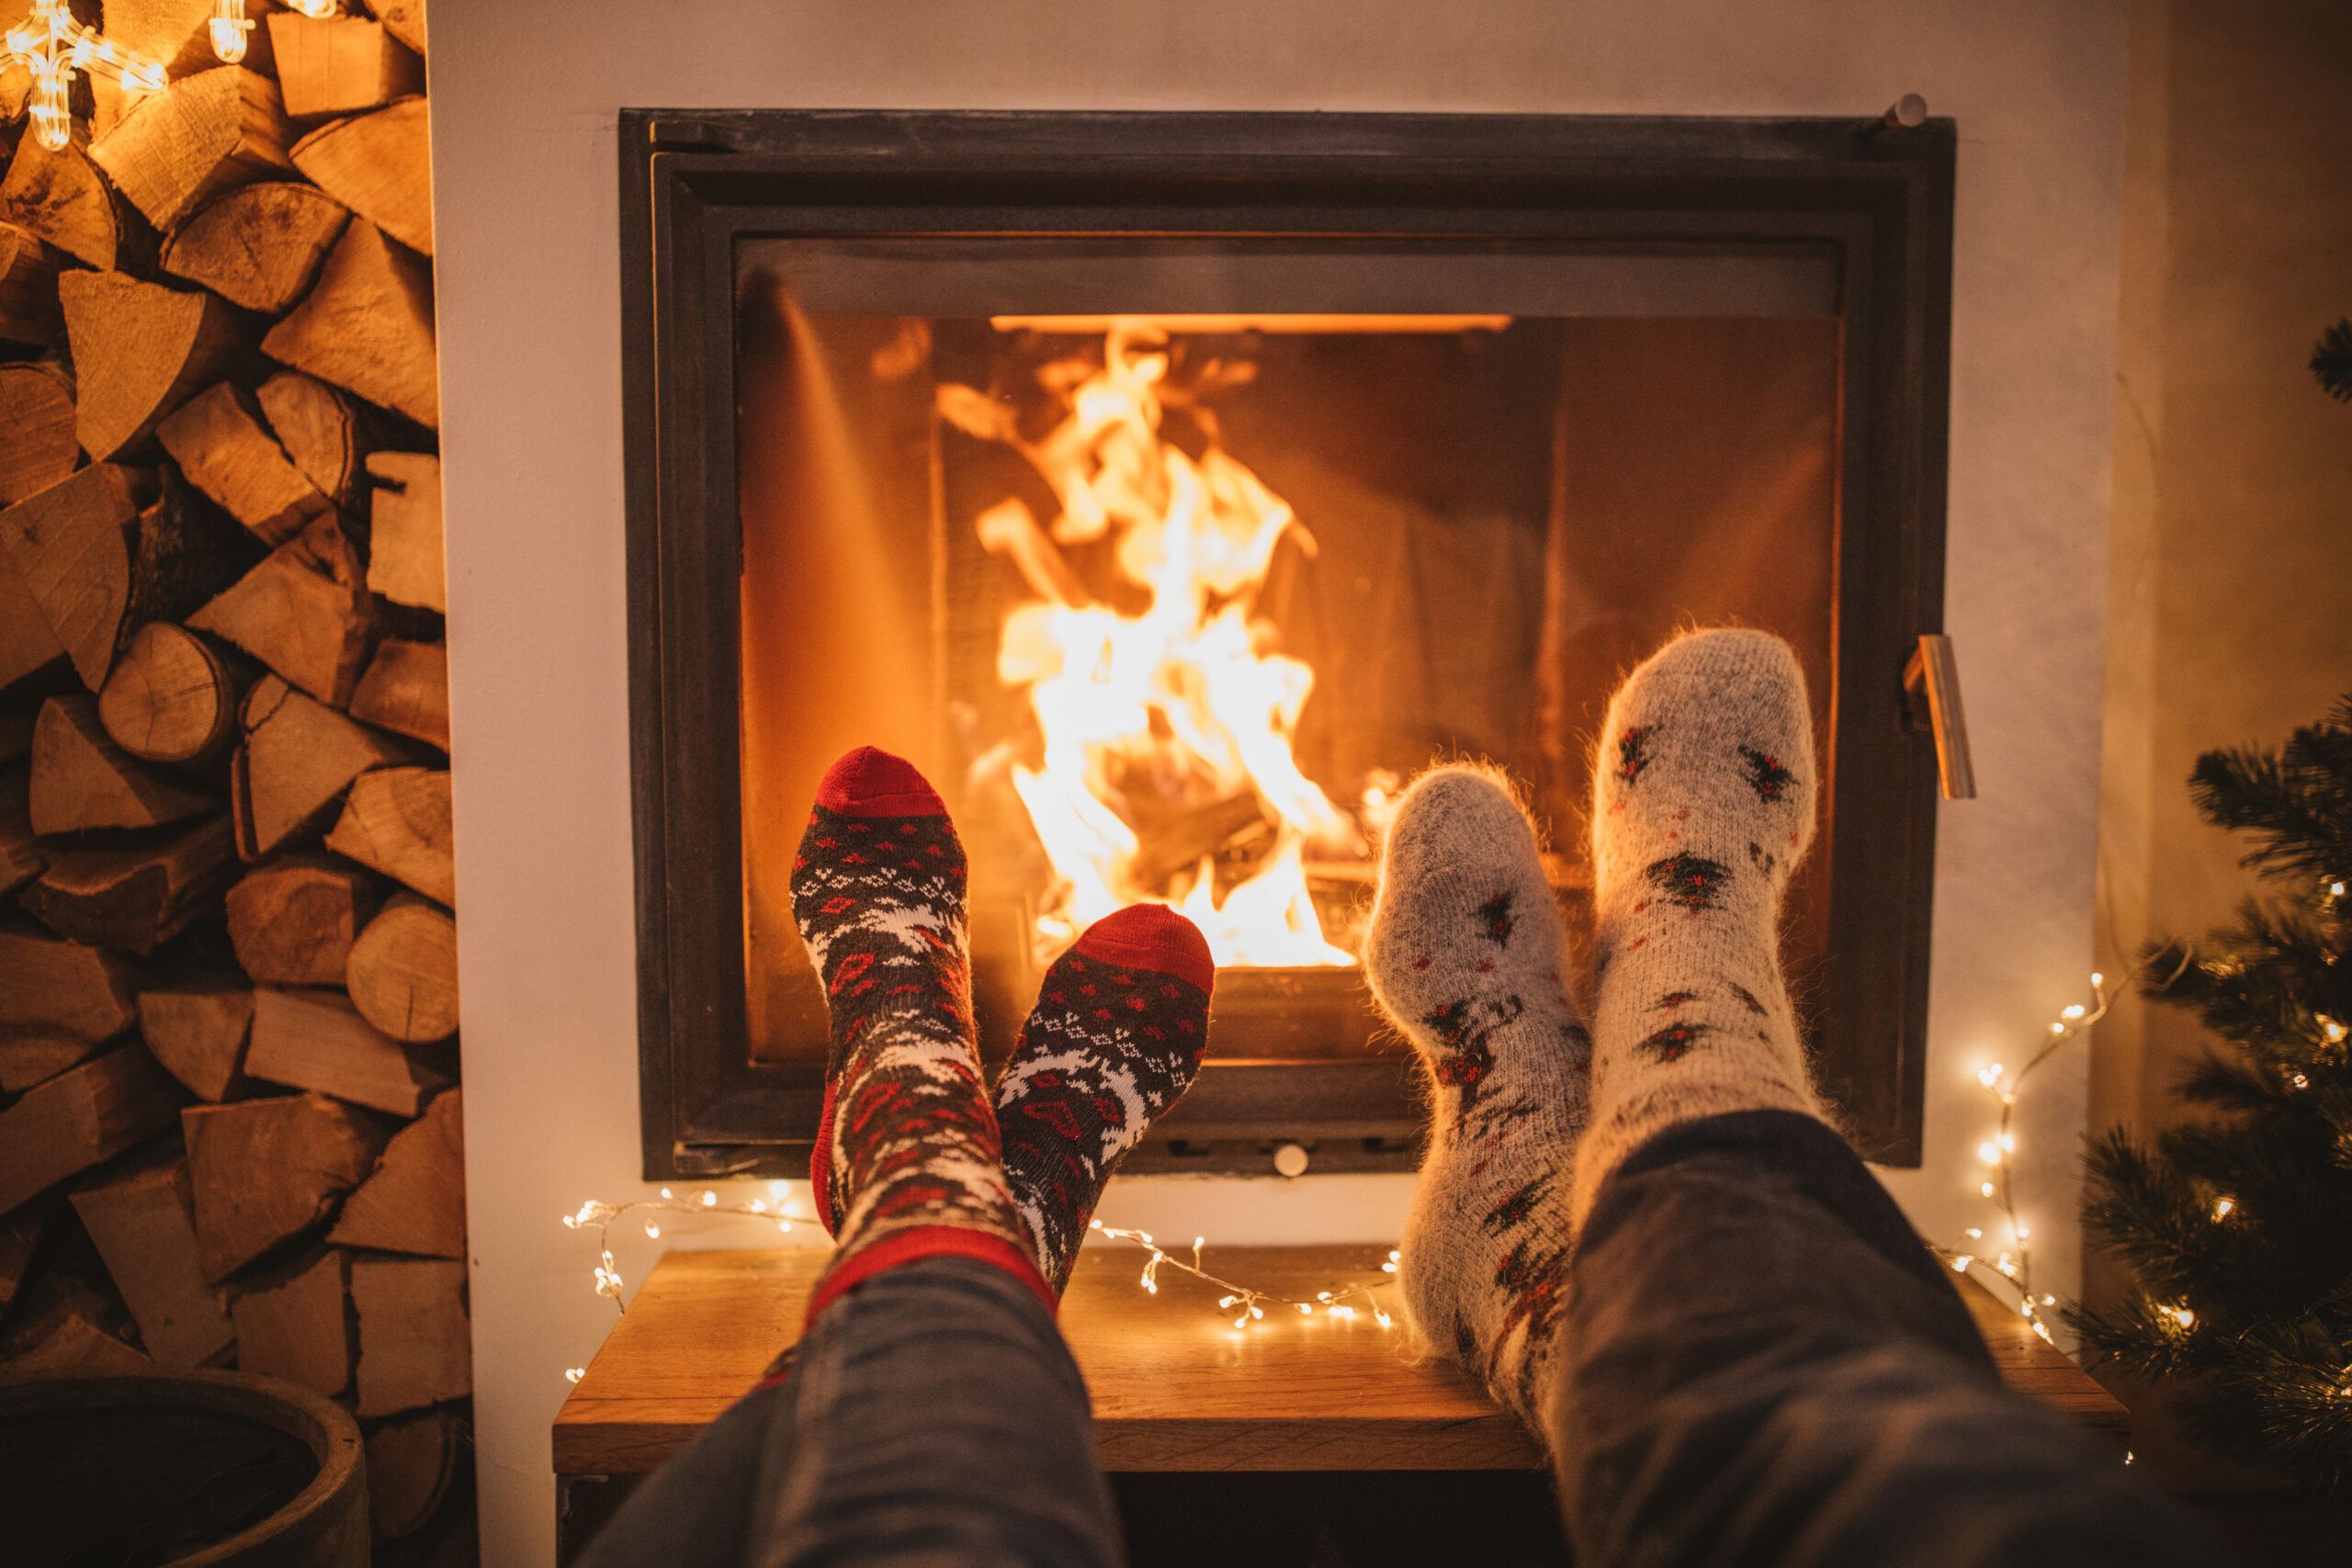 How repairing/servicing your fireplace can save you money in the long run